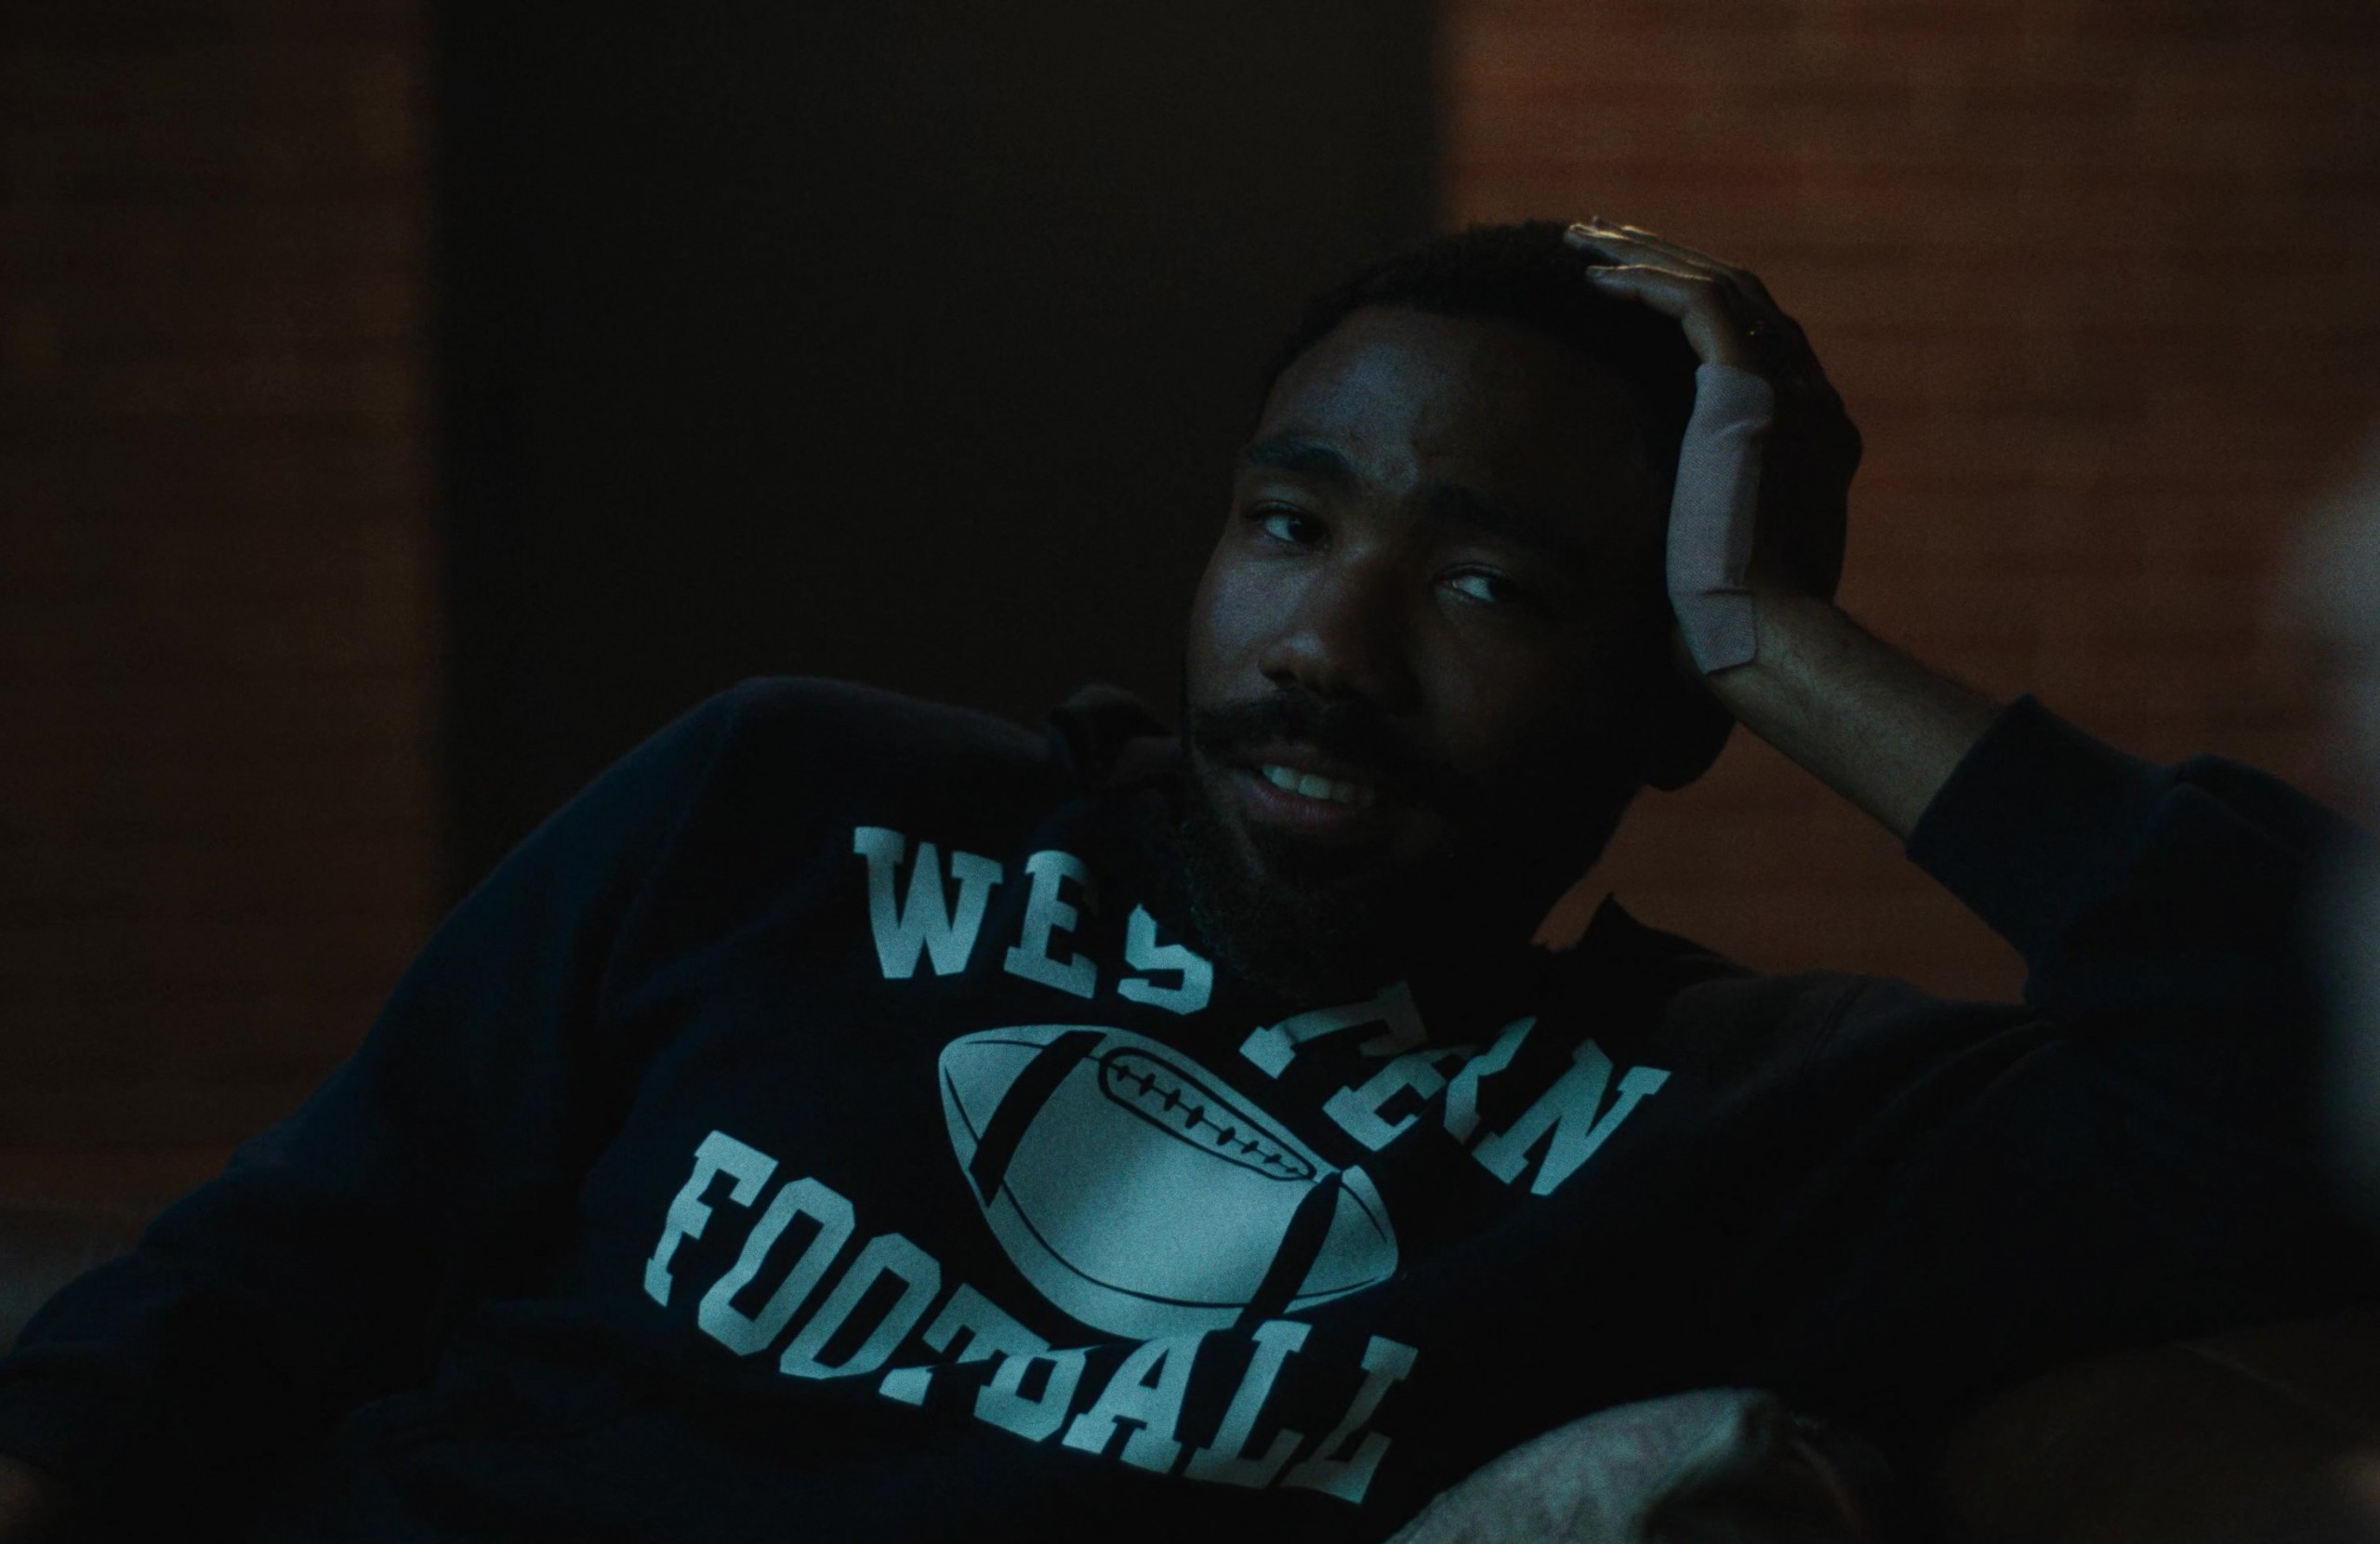 Worn on Mr. & Mrs. Smith TV Show - Western Football Hoodie of Donald Glover as John Smith